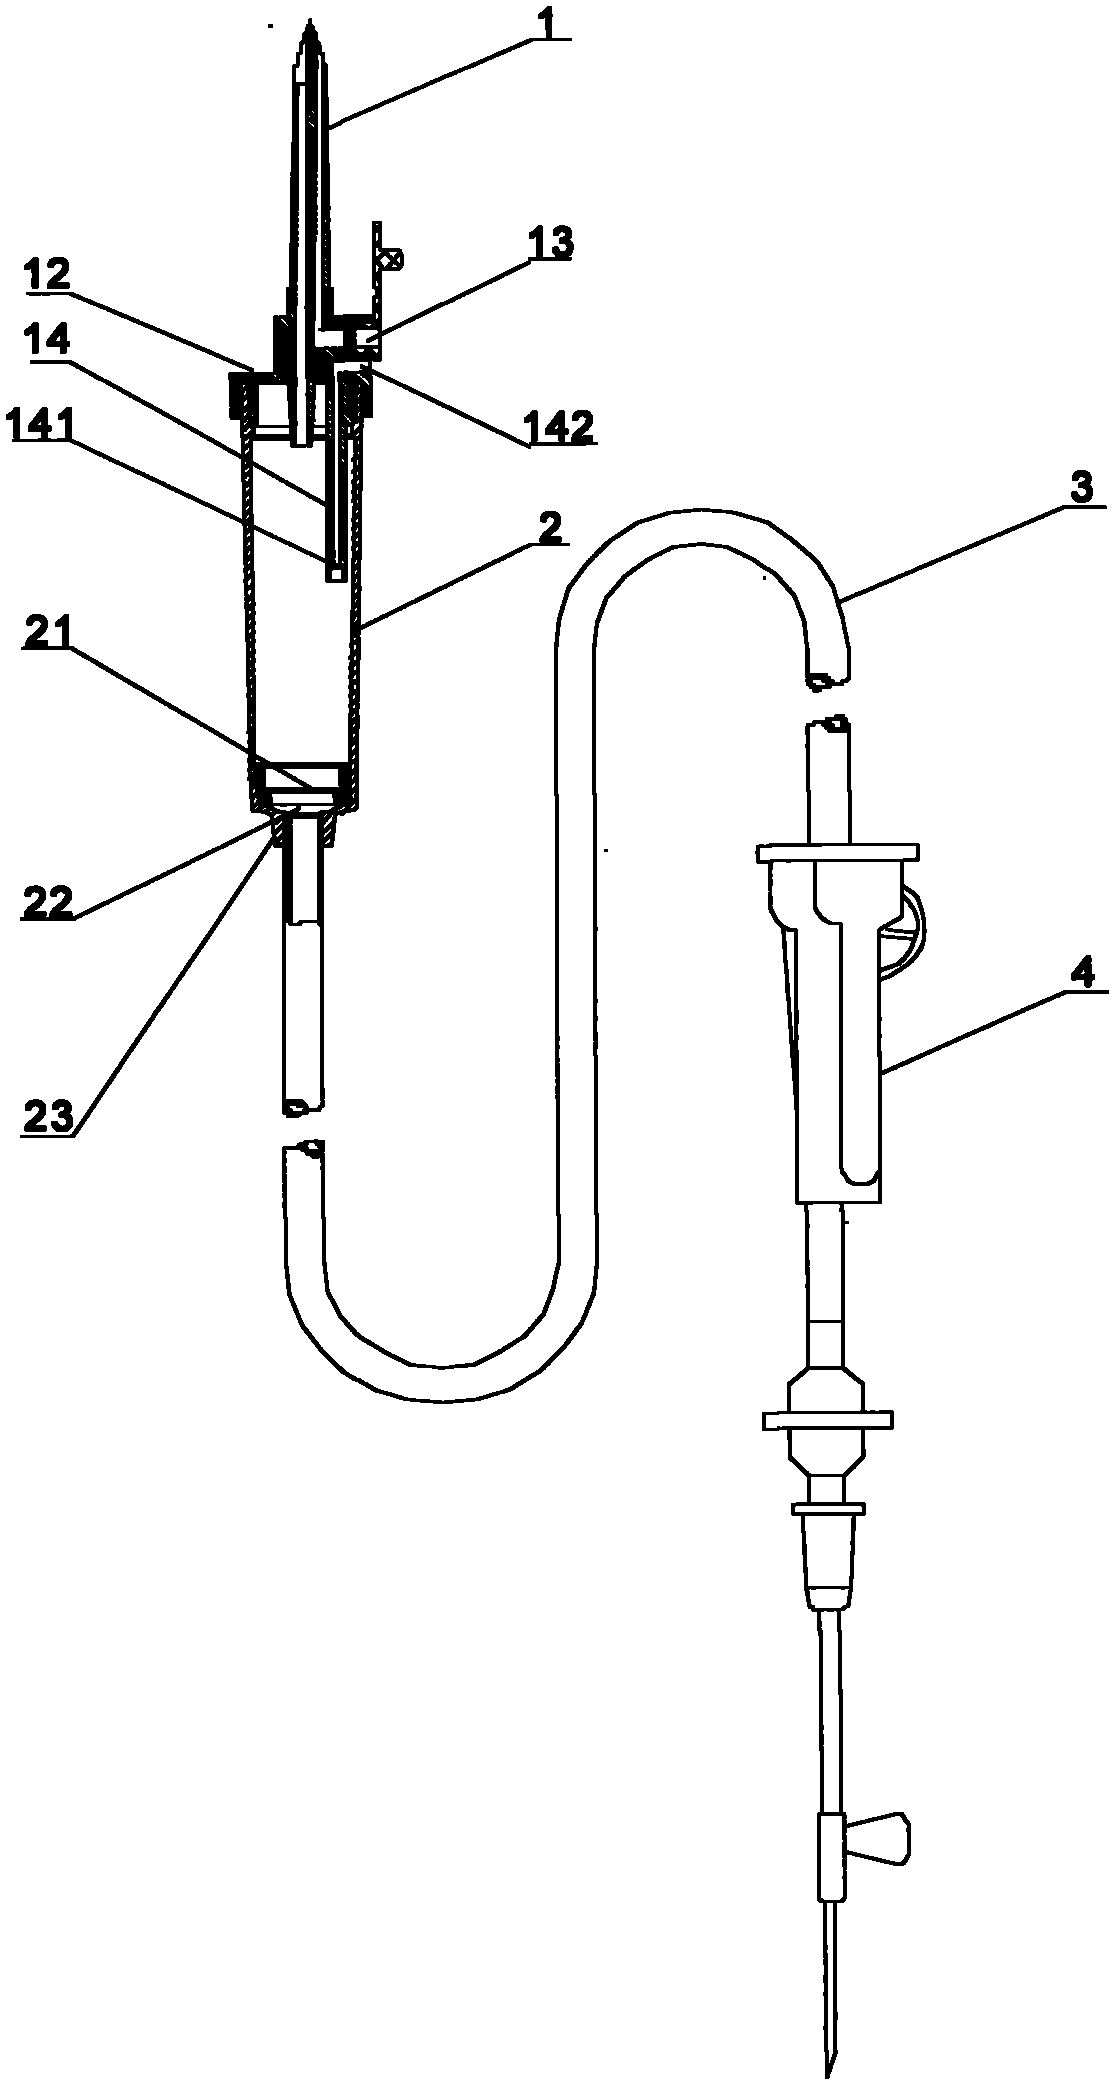 Manufacturing method of safe transfusion system based on bubbling point pressure principle